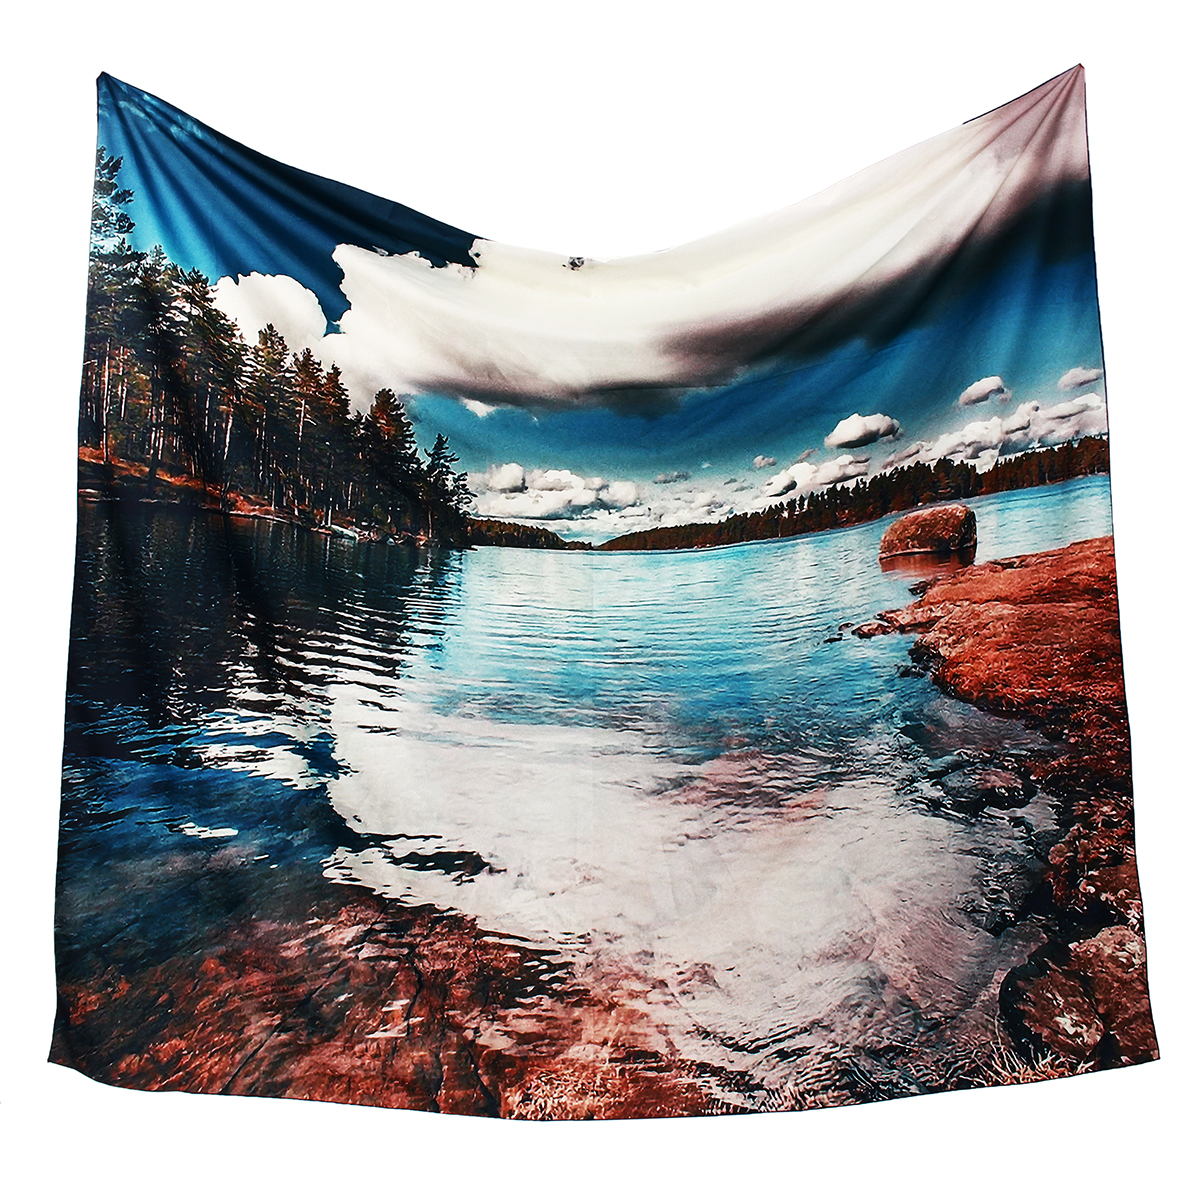 Forest-World-Map-Tapestries-Wall-Hanging-Paper-Tapestry-Bedspread-Dorm-Decor-1436138-10